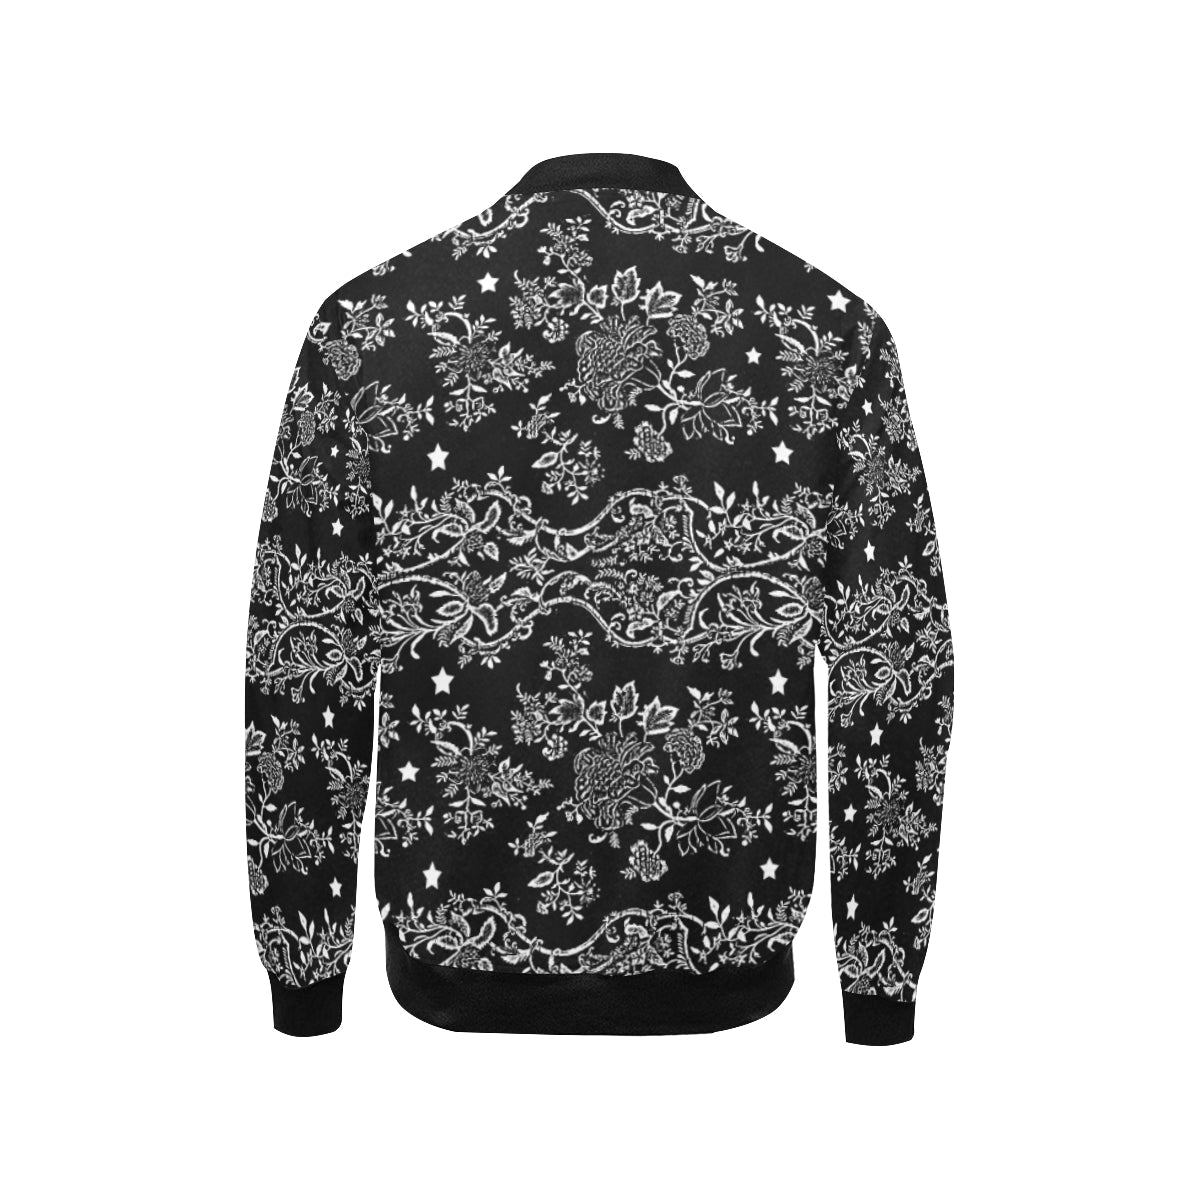 Lace N stars, Black Bomber Jacket by Stardust